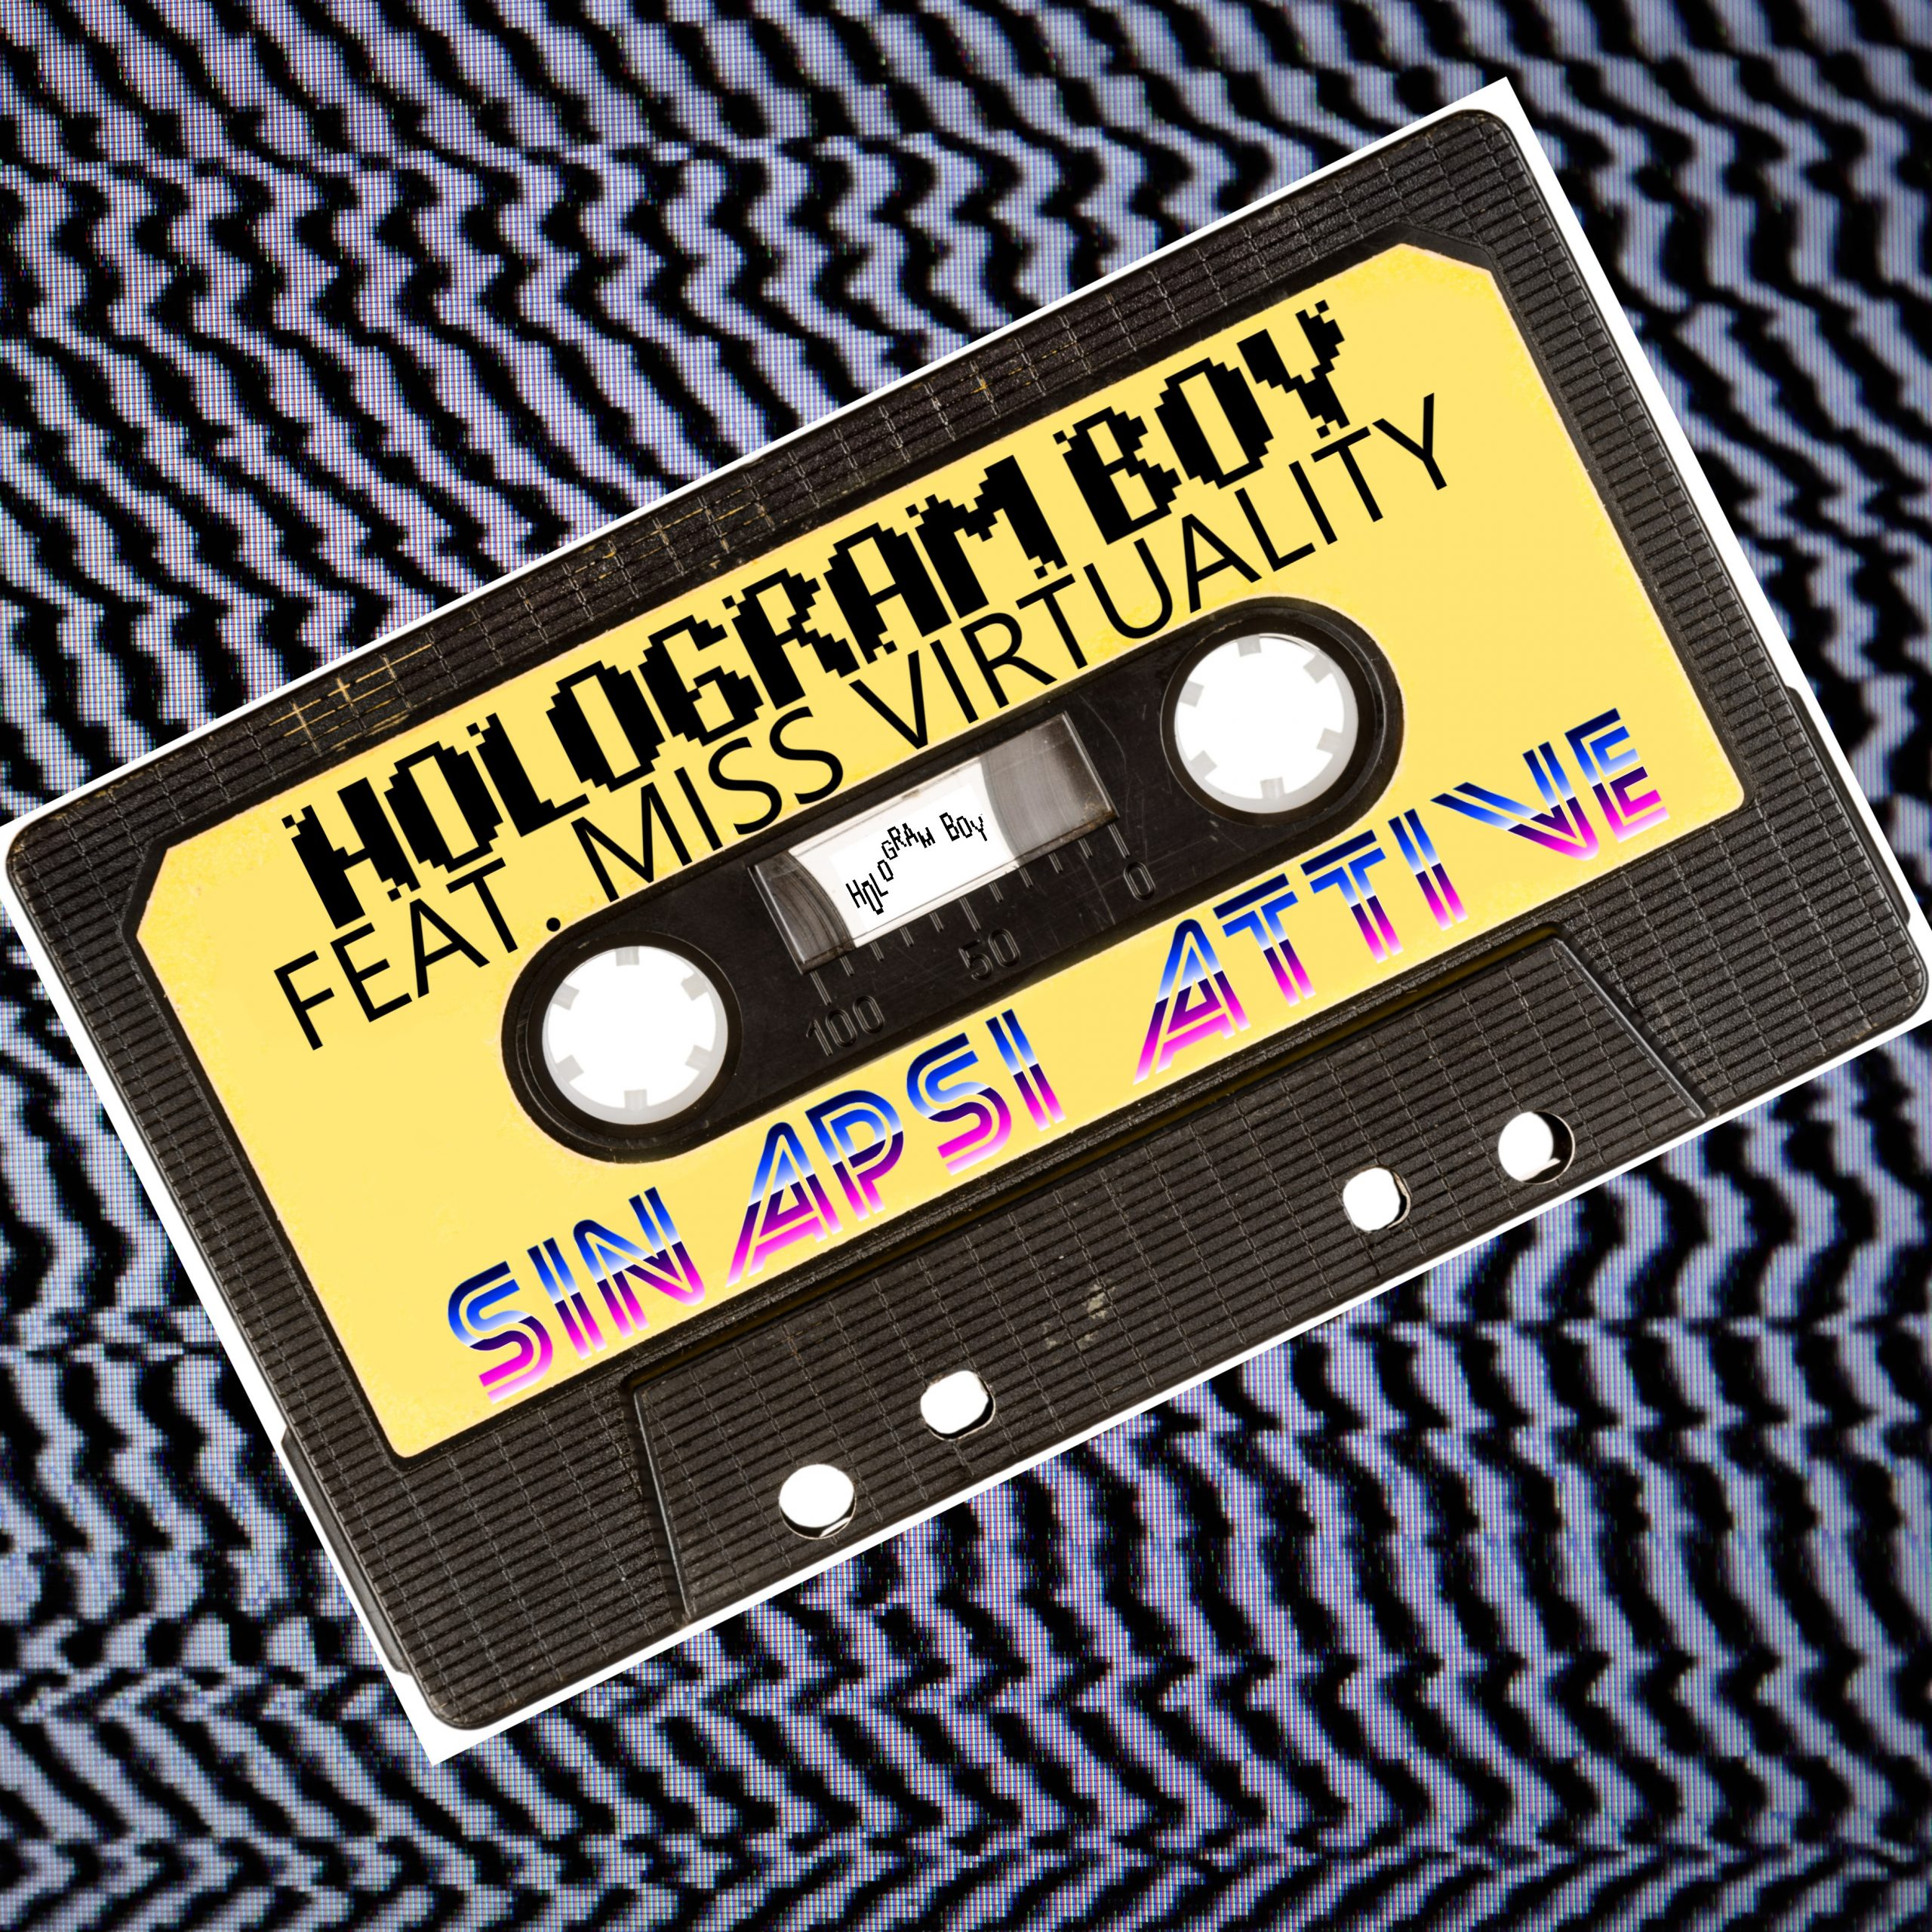 With all the disruptive electric charge of the best aesthetic short circuits, , HOLOGRAM BOY releases his first single “SINAPSI ATTIVE”